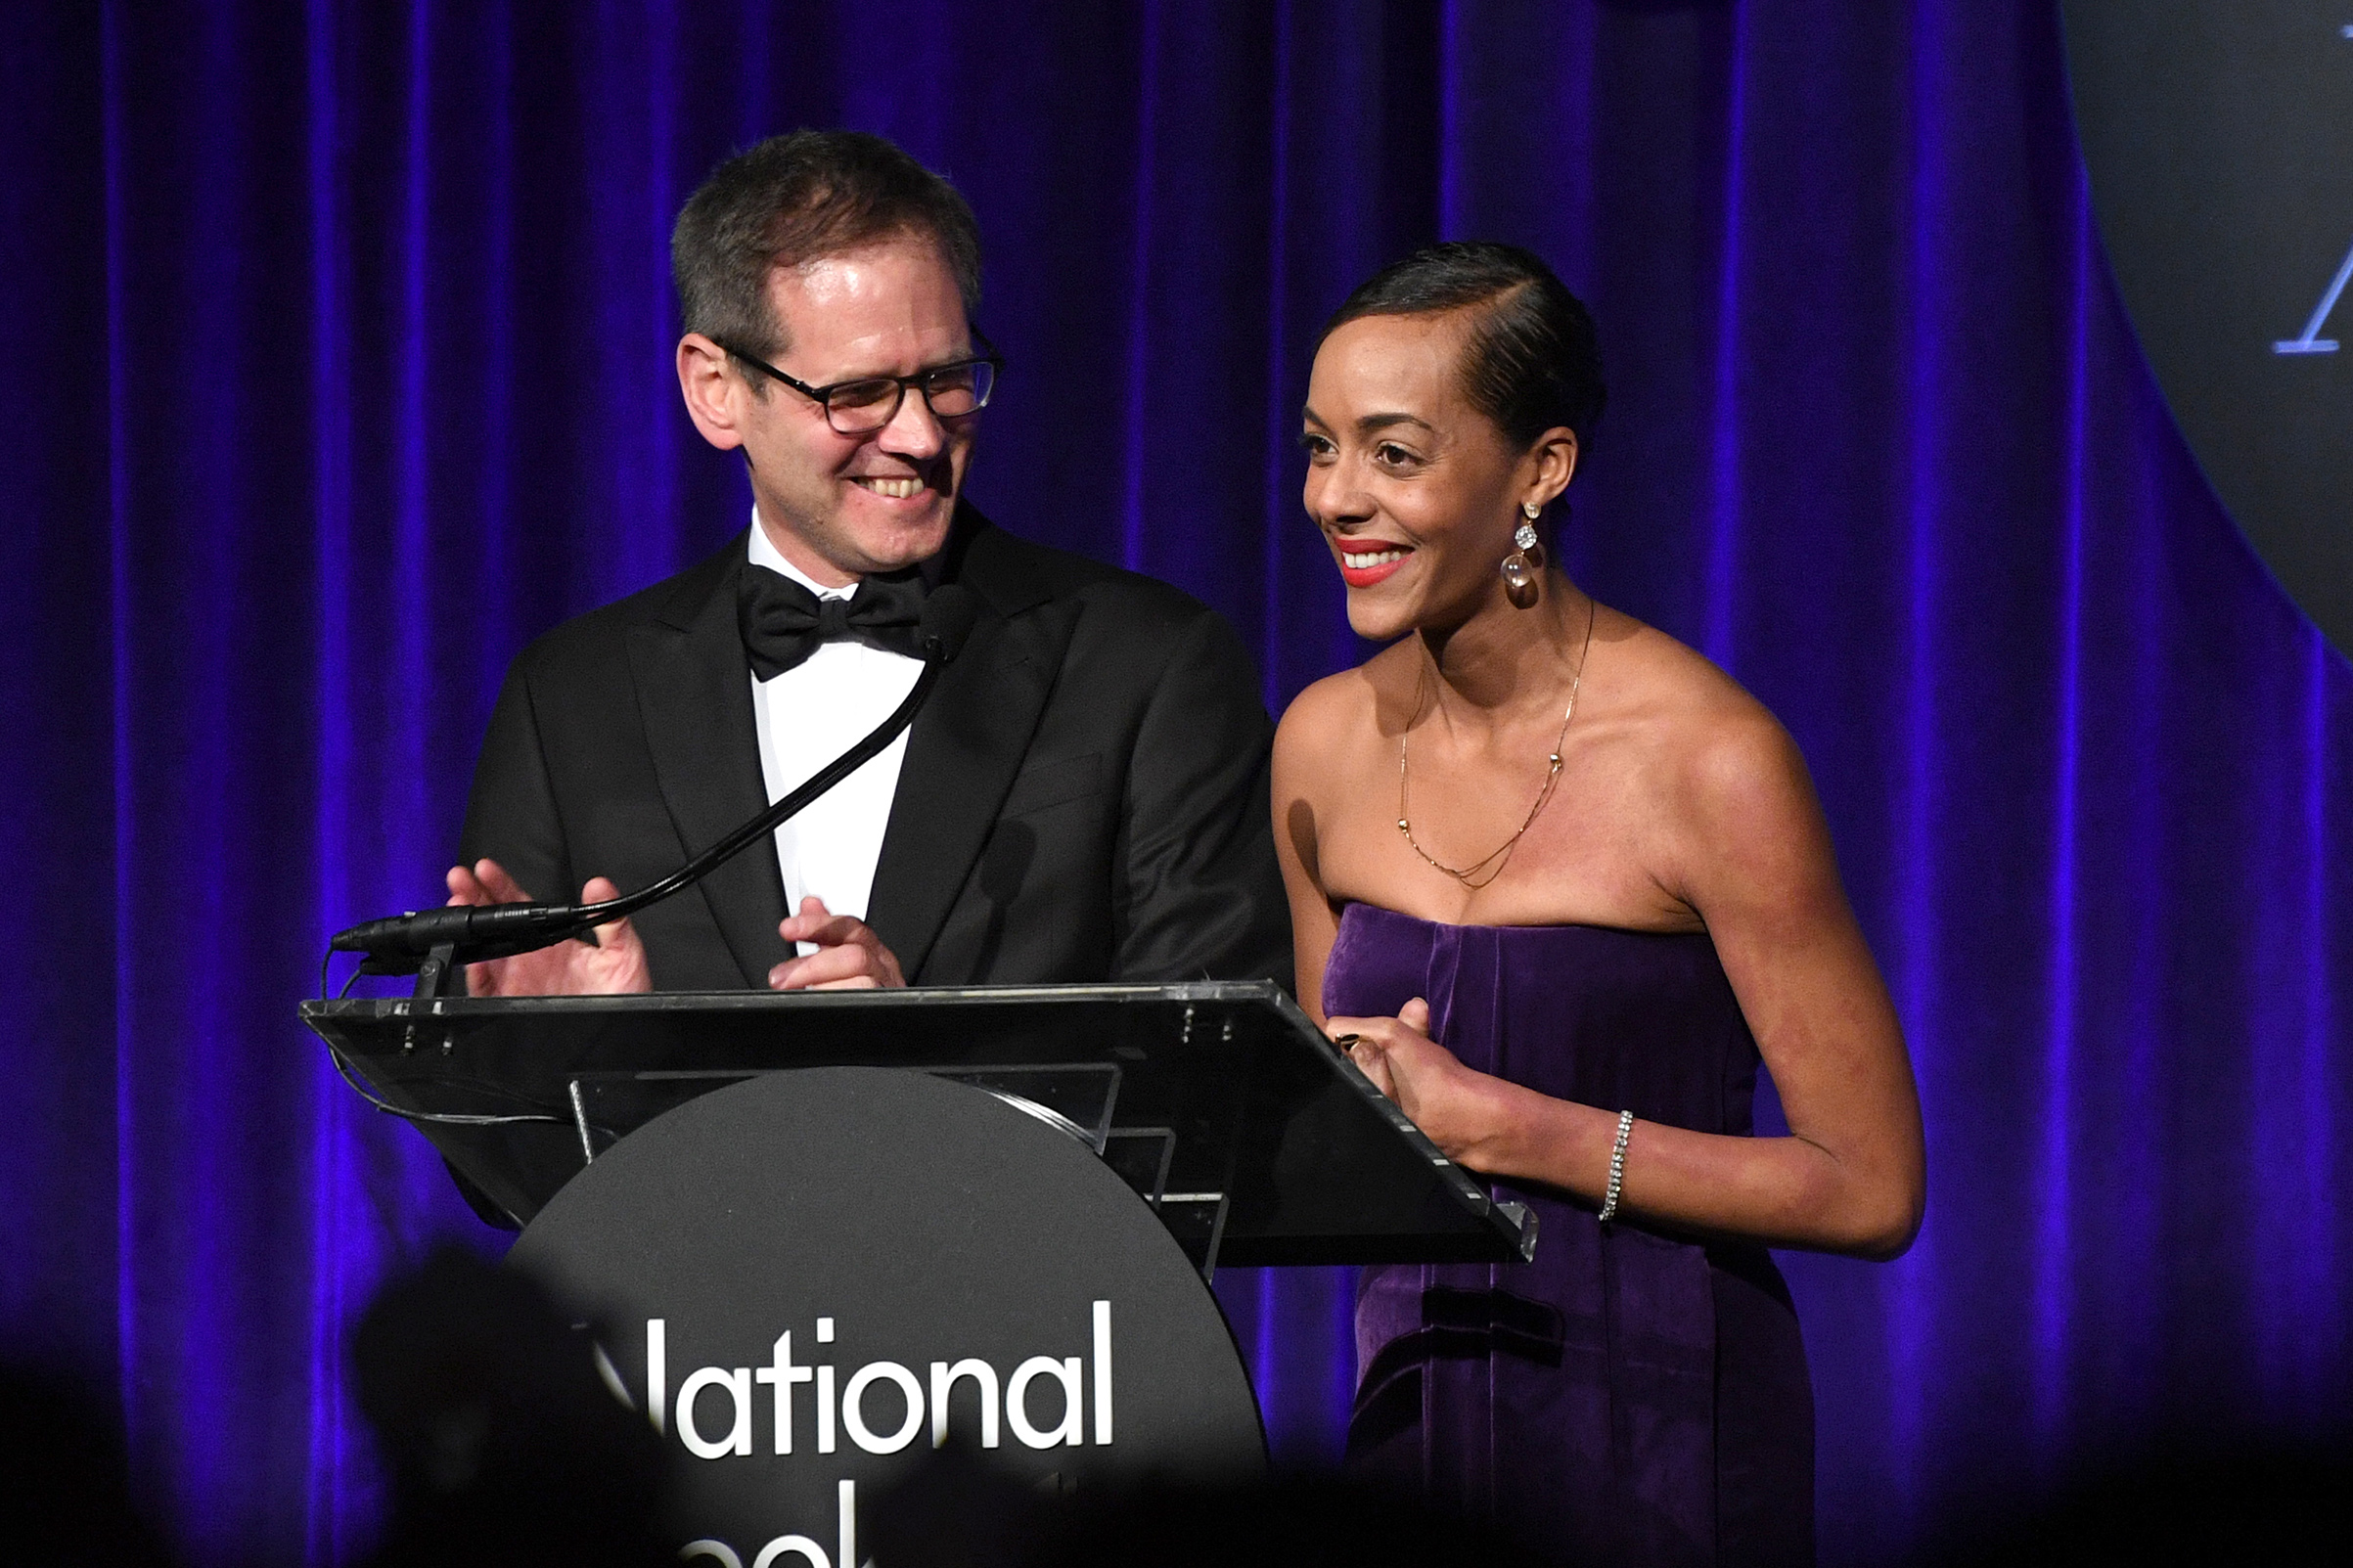 David Steinberger and Lisa Lucas speak onstage during the 68th National Book Awards at Cipriani Wall Street on November 15, 2017 in New York City. (Dimitrios Kambouris—Getty Images)